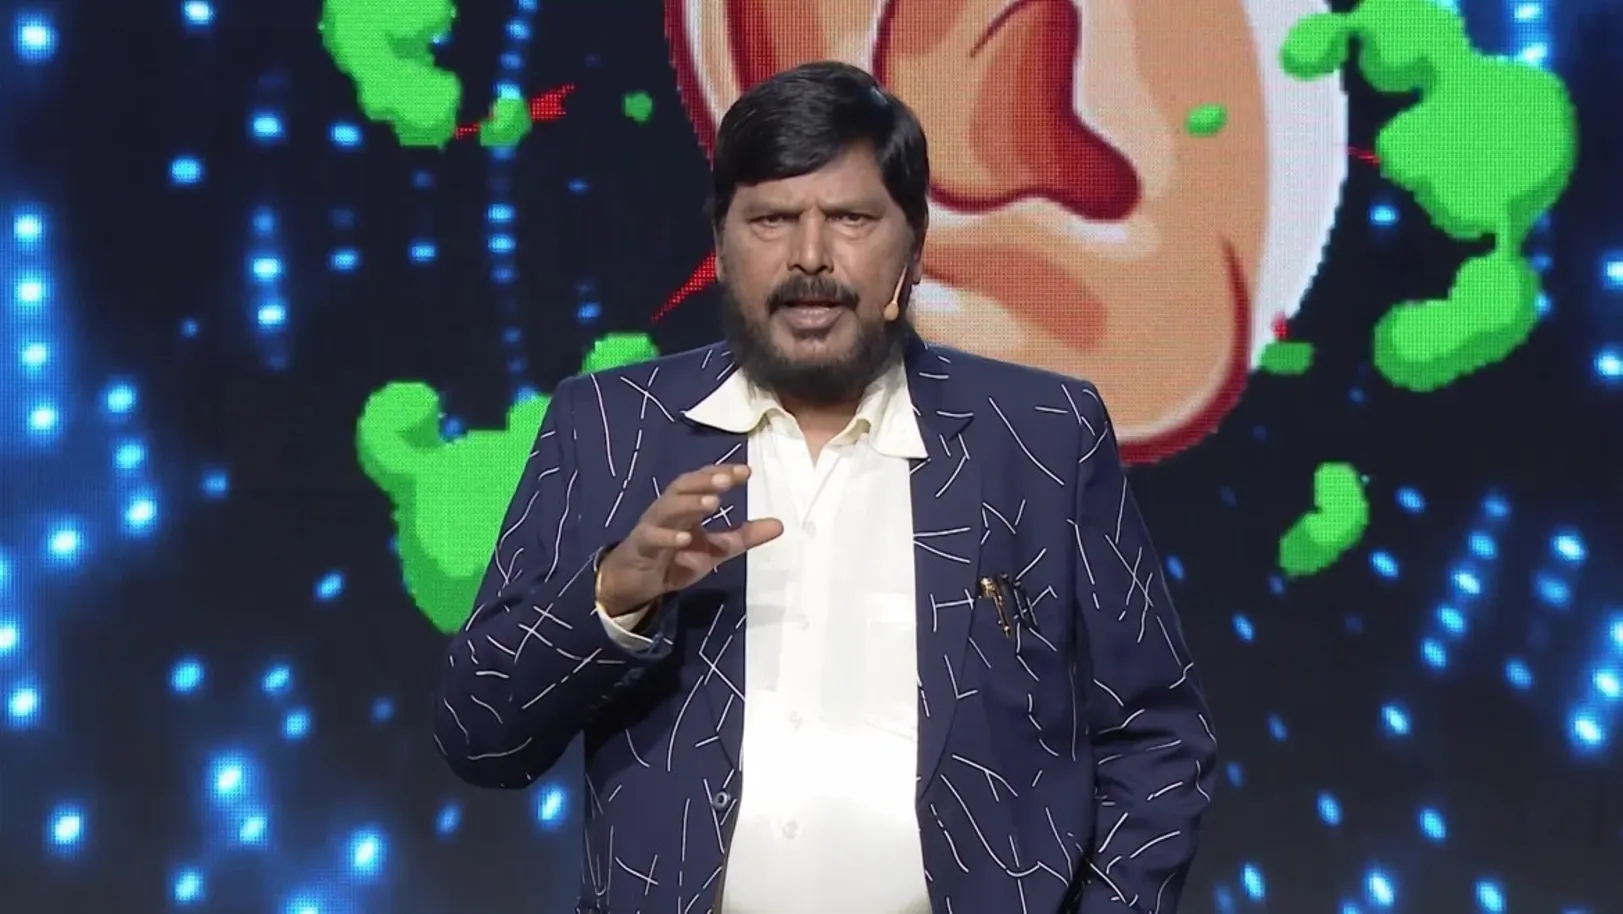 Ramdas Athawale starts the show in his style 